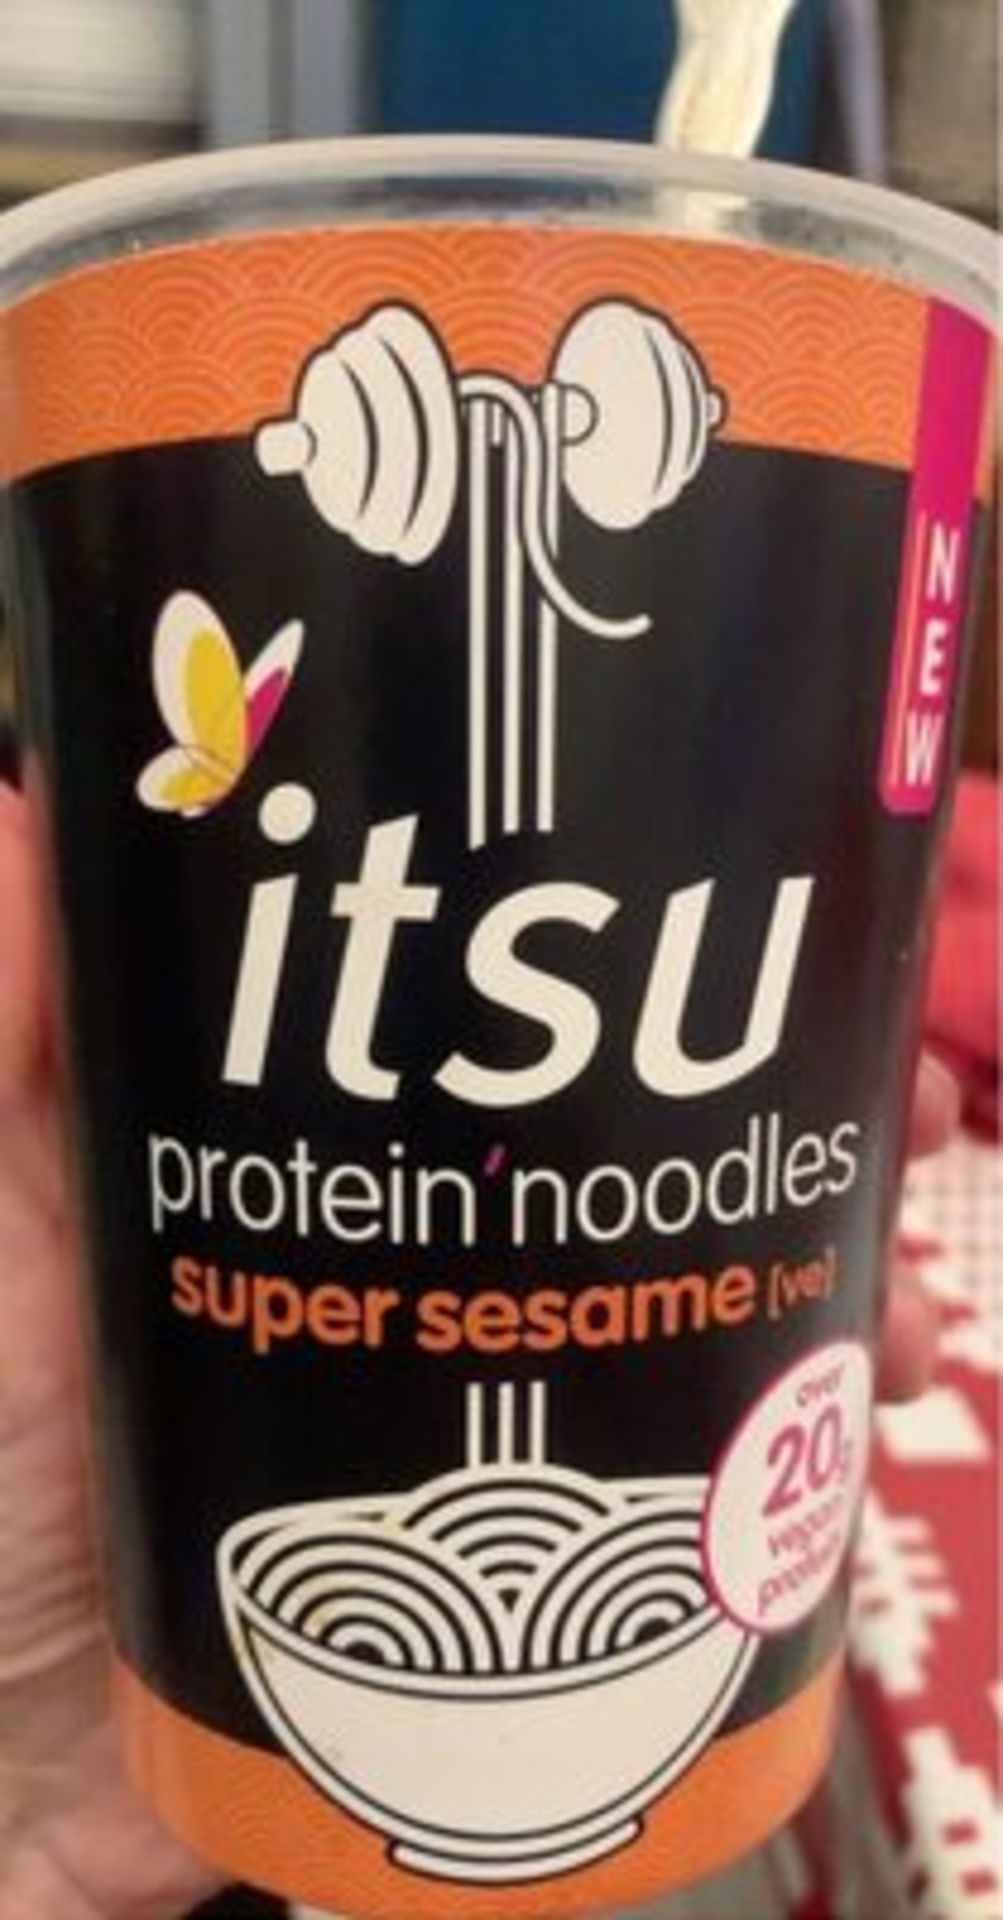 RRP £150 Itsu Protein noodles super sesame 6x64g [×7] bbe 4.24 - Image 2 of 2